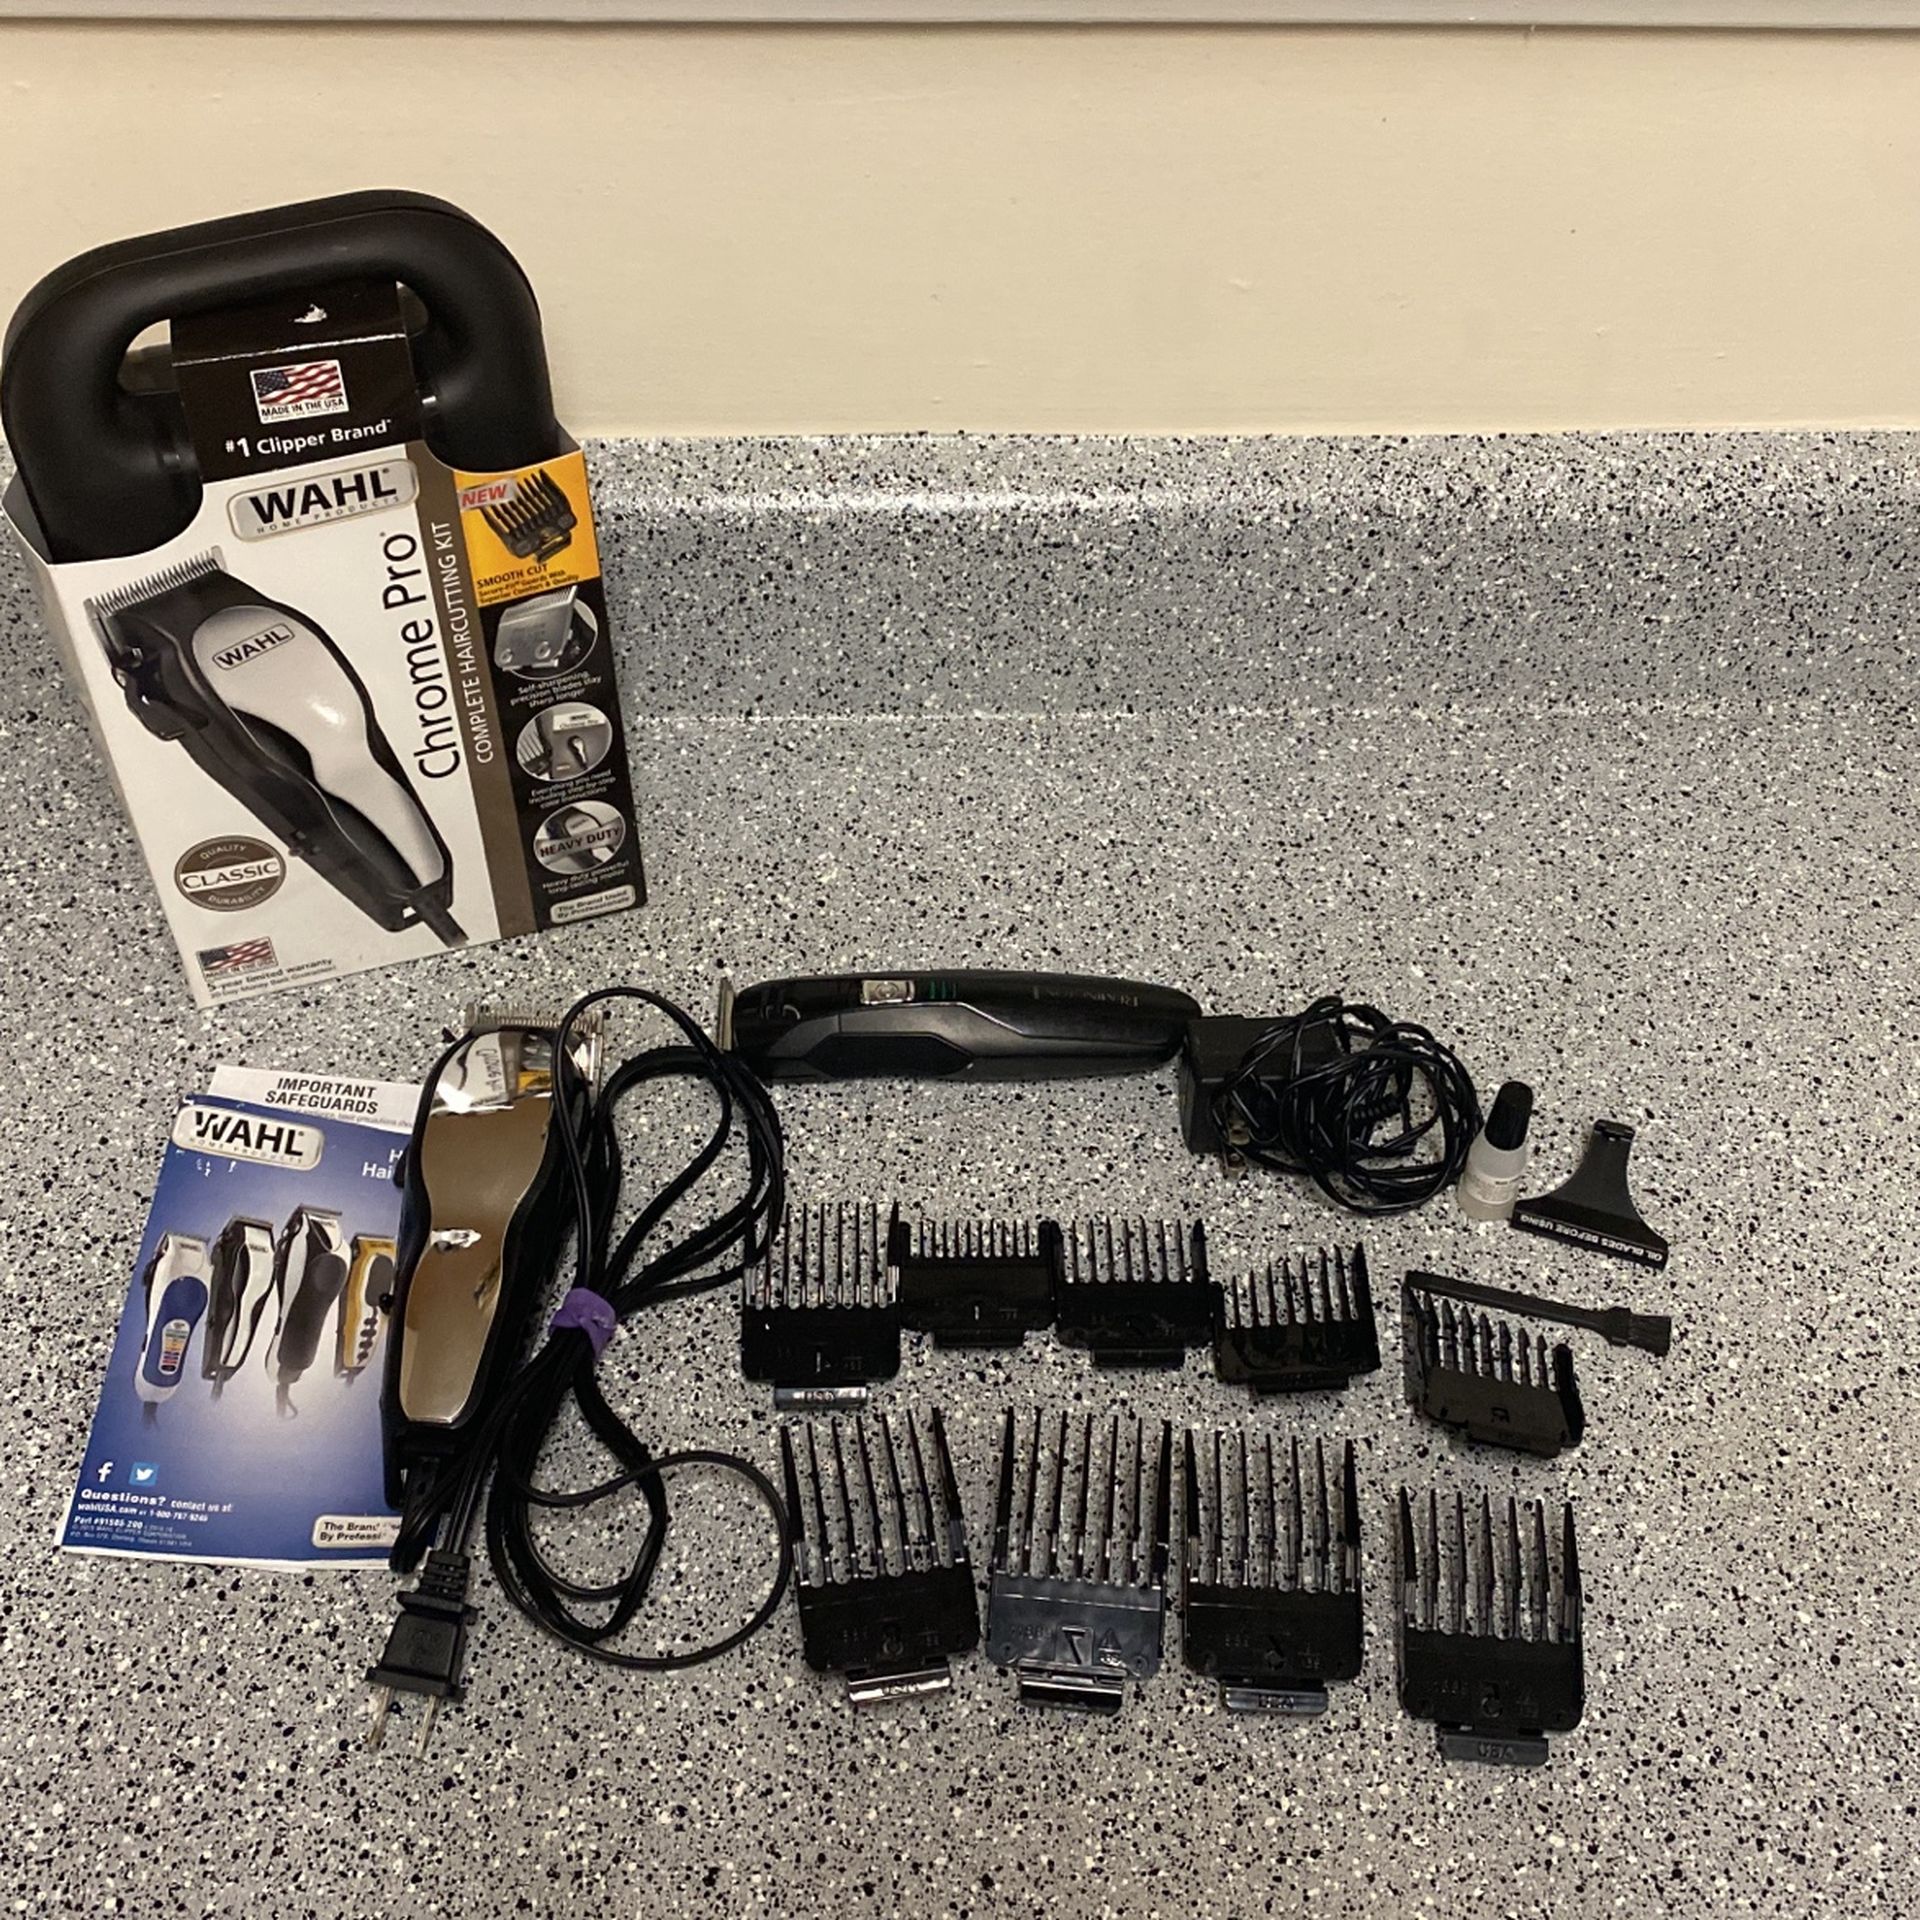 Wahl Chrome Pro Haircutting Clippers Kit: FREE MINI CLIPPERS INCLUDED